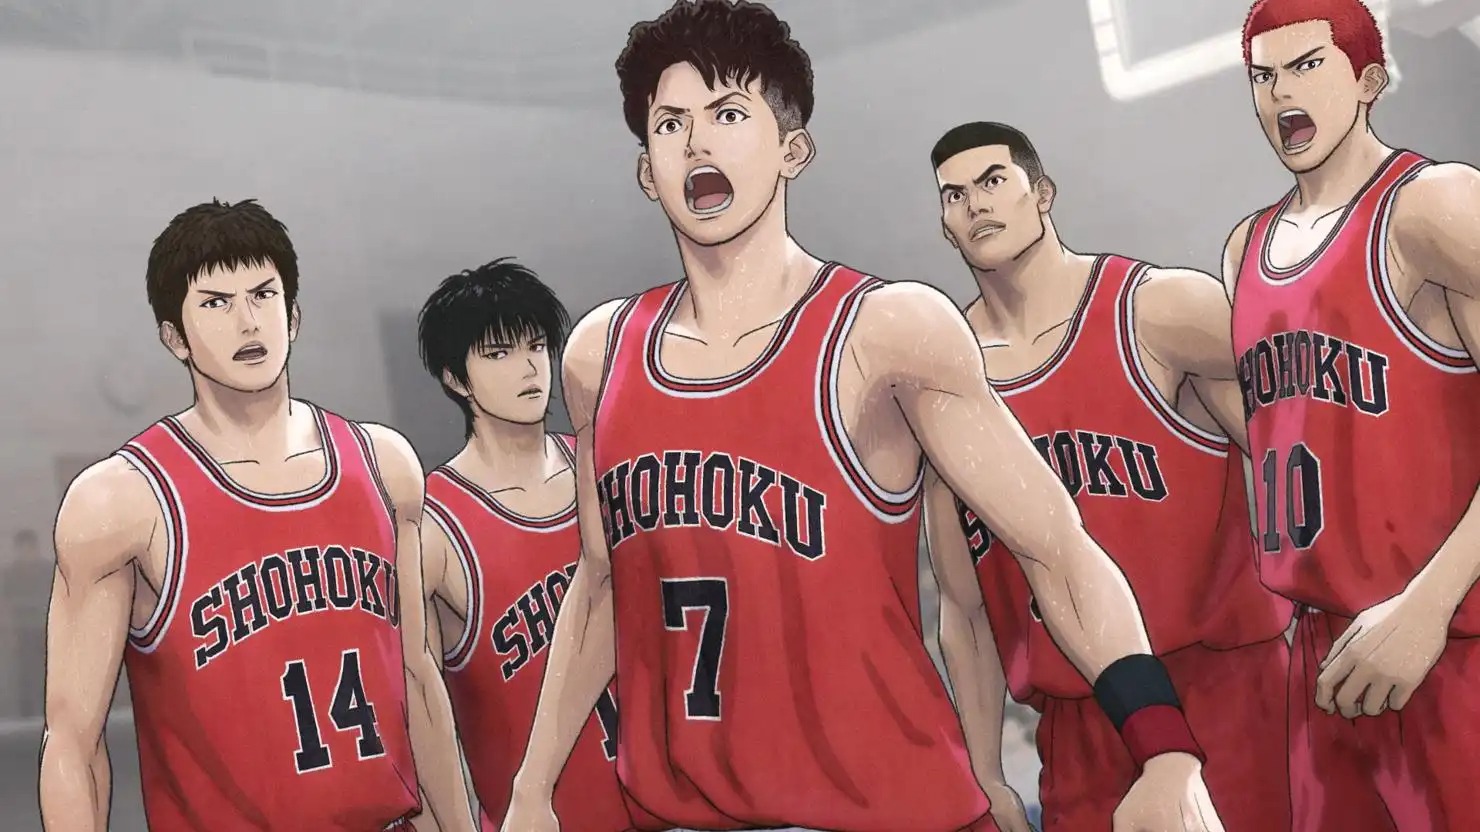 THE FIRST SLAM DUNK Anime Film Jumps Above The Wind Rises to Become the 27th Highest-Grossing Film in Japan